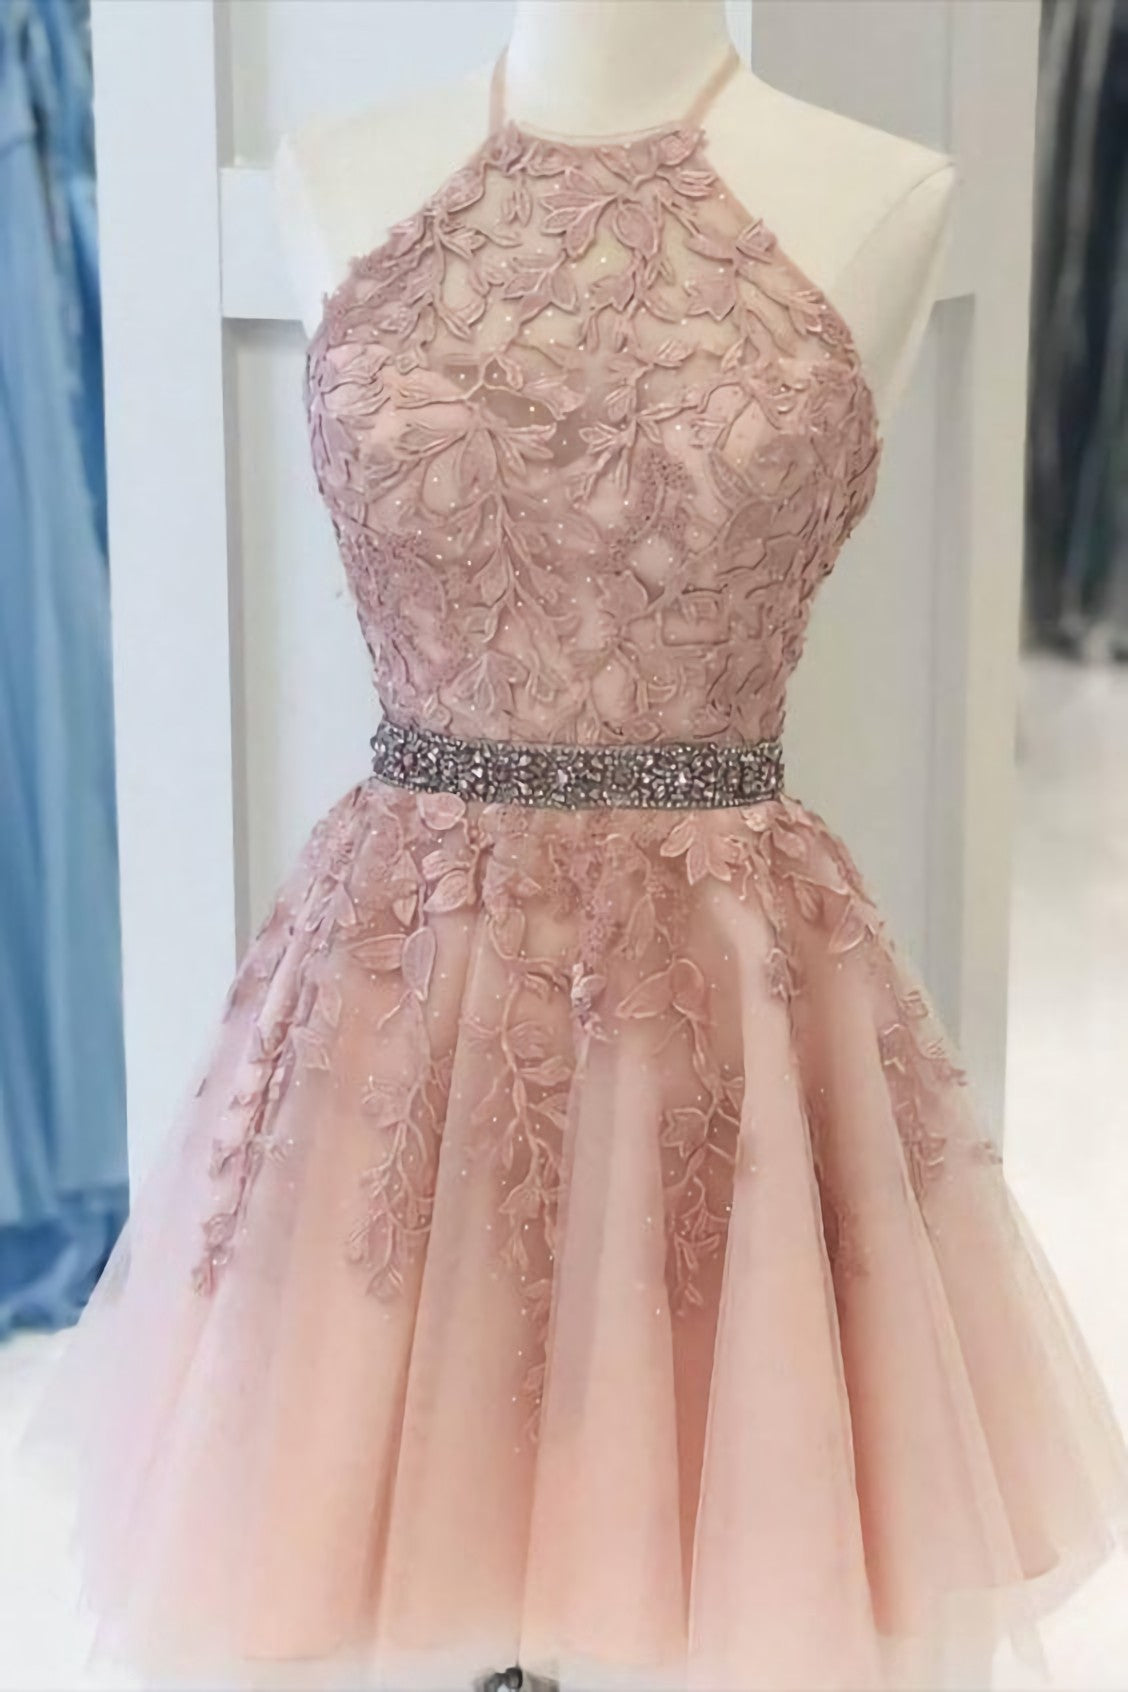 Prom Dressed A Line, Pink Halter Appliqued Homecoming Dress, With Beading Belt